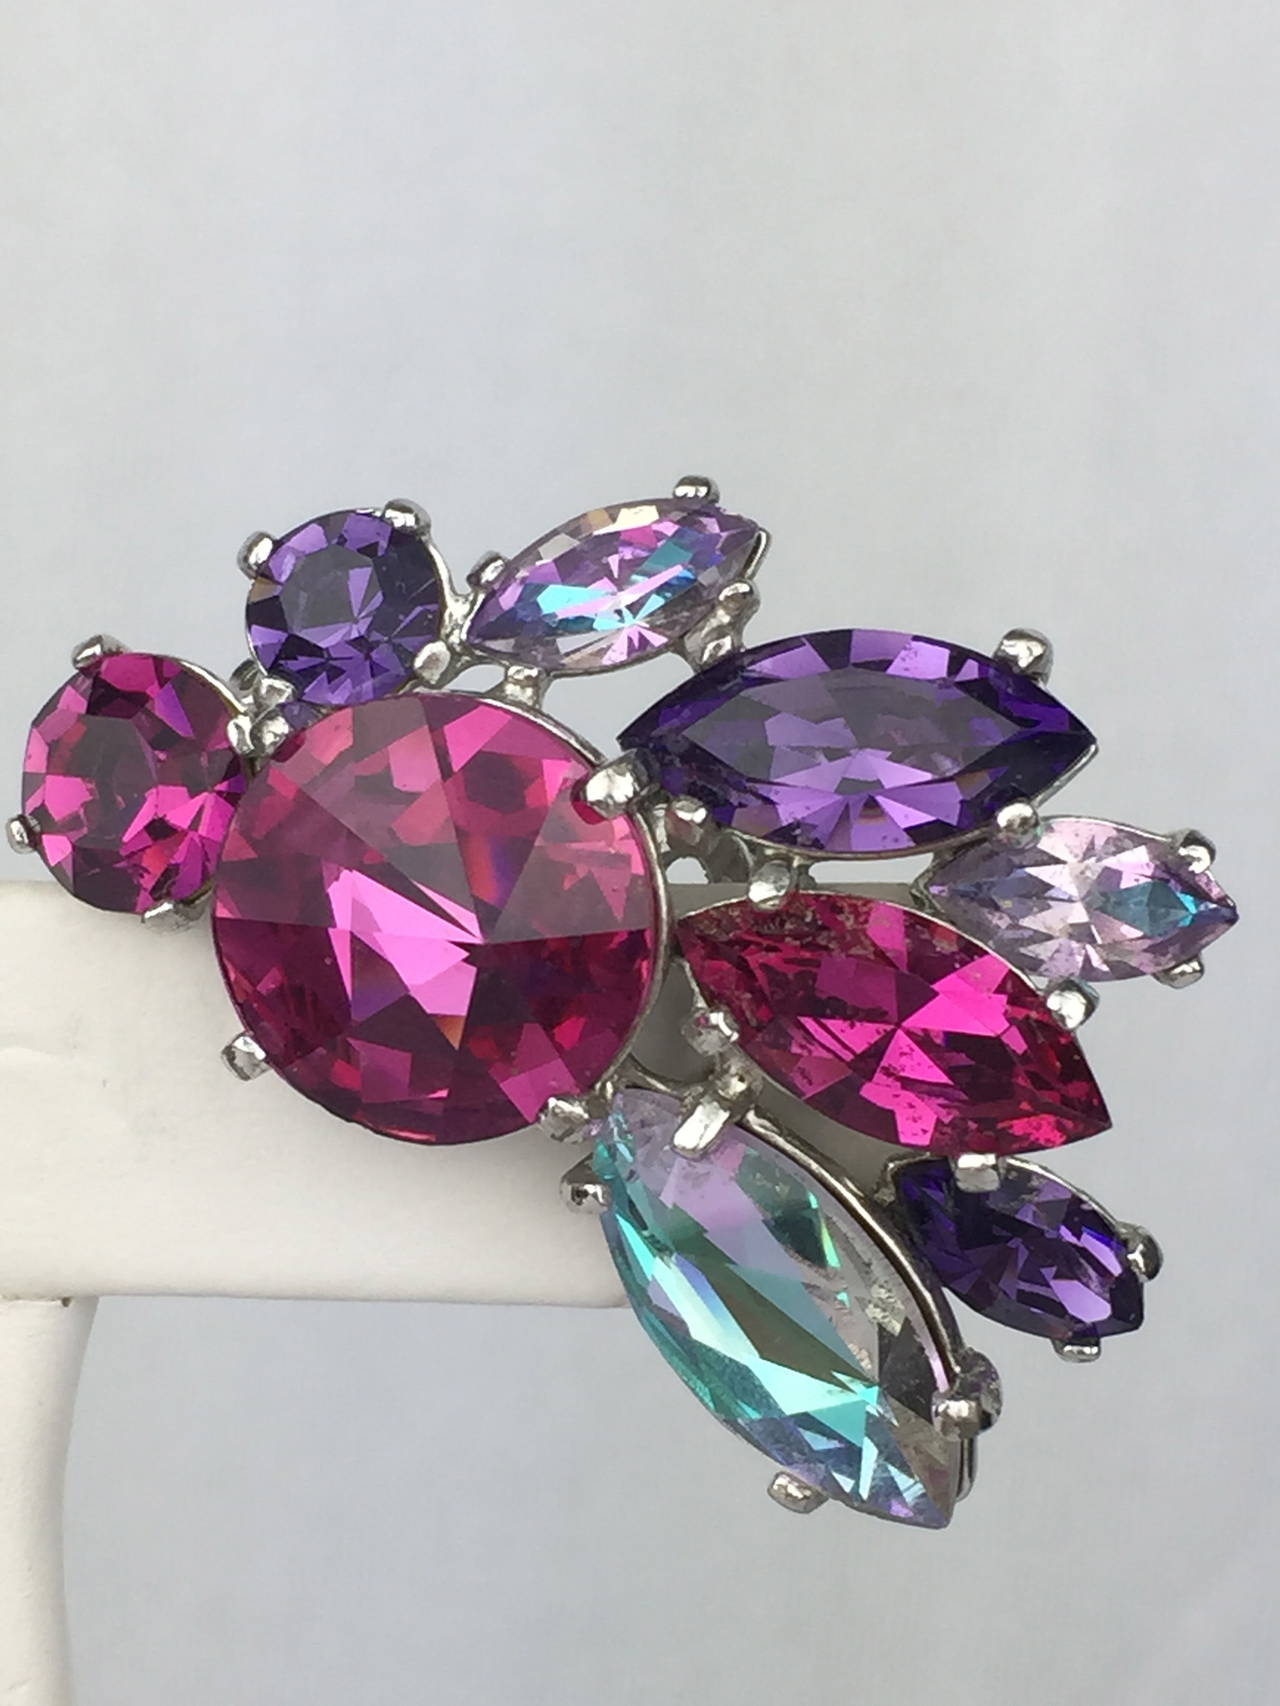 Outstanding fuchsia pink and purple Schiaparelli vintage earrings from the early 1960's.  Such an unusual color palette for Schiap and so pretty!

Length:  1.5 inches.  Width: 1.25 inches

The condition is excellent.  These earrings are very